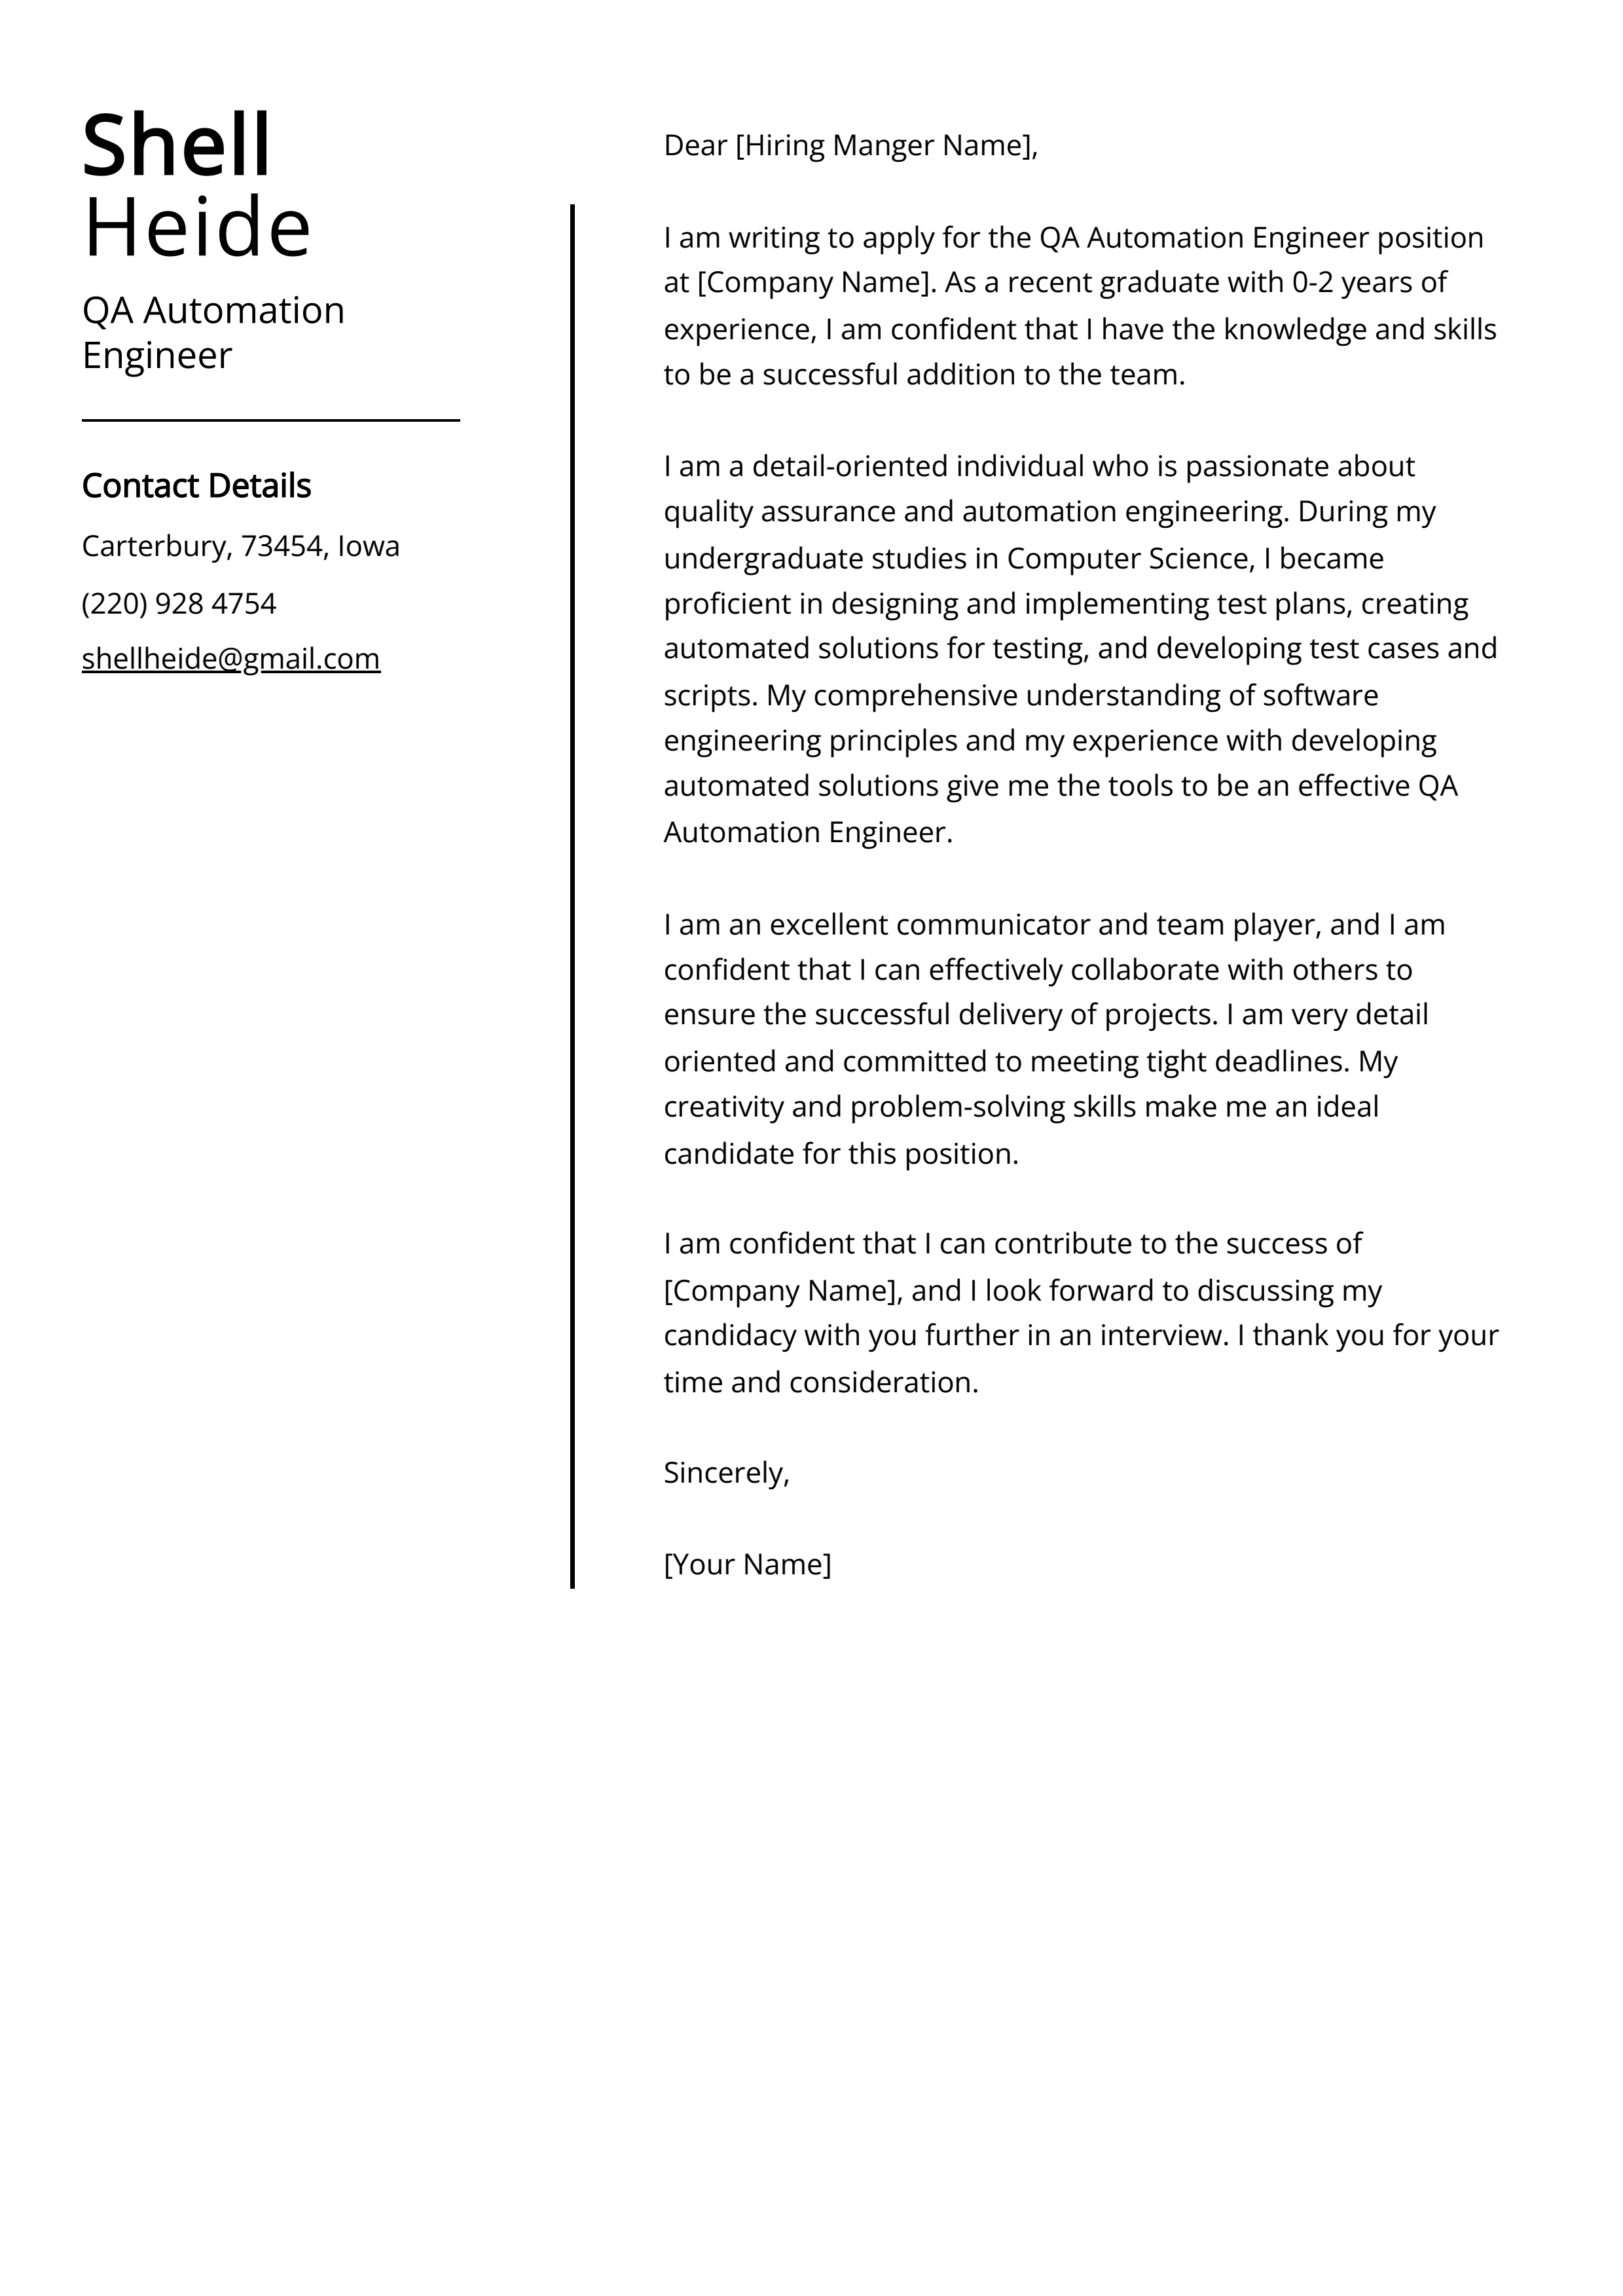 QA Automation Engineer Cover Letter Example